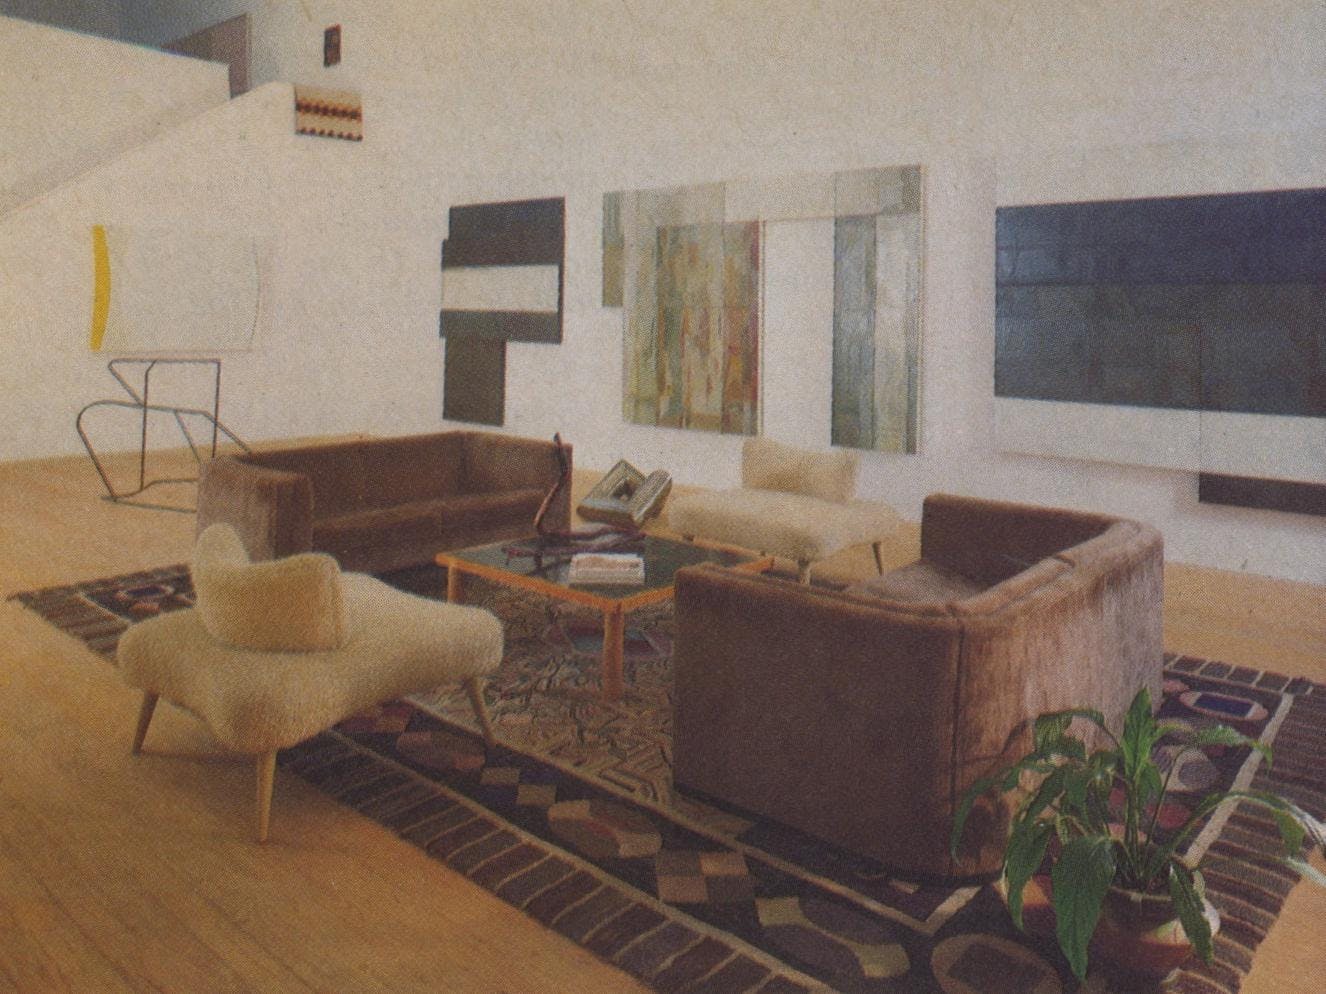 The simple furnishings of the living room are set off by a large 19th-century French Canadian hooked rug. The new three-piece oil painting by David Novros has been hung to dry and is for sale. On the floor are metal sculptures by Clark Murray. A snakeroot sculpture sits on a “tea table” by Billy Al Bengston, and Jo Baer's “M. Refractarius” hangs on the stairwell wall.